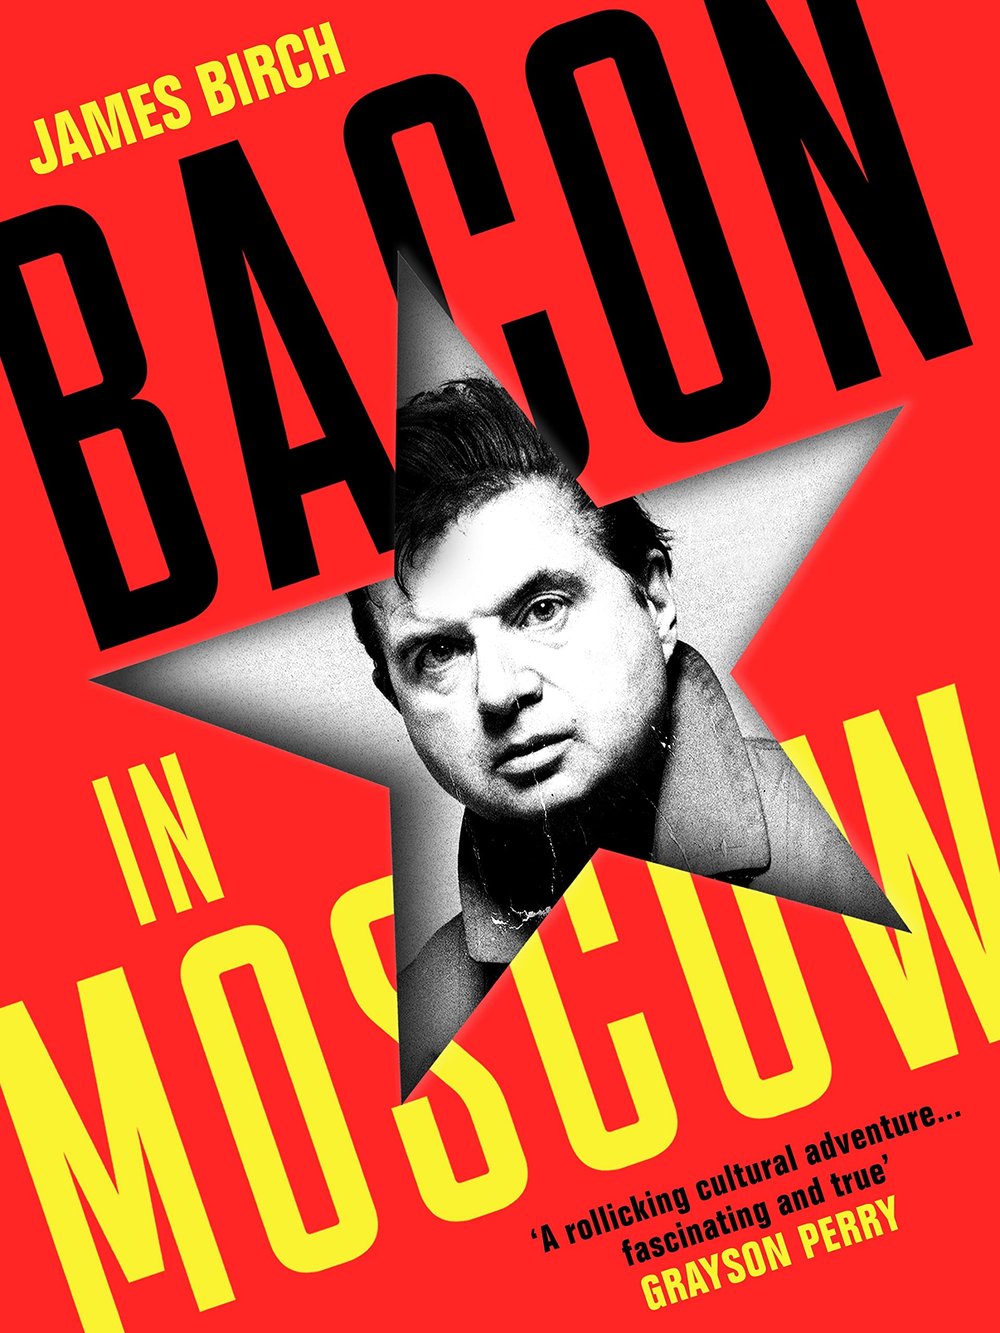 Bacon In Moscow by James Birch '22